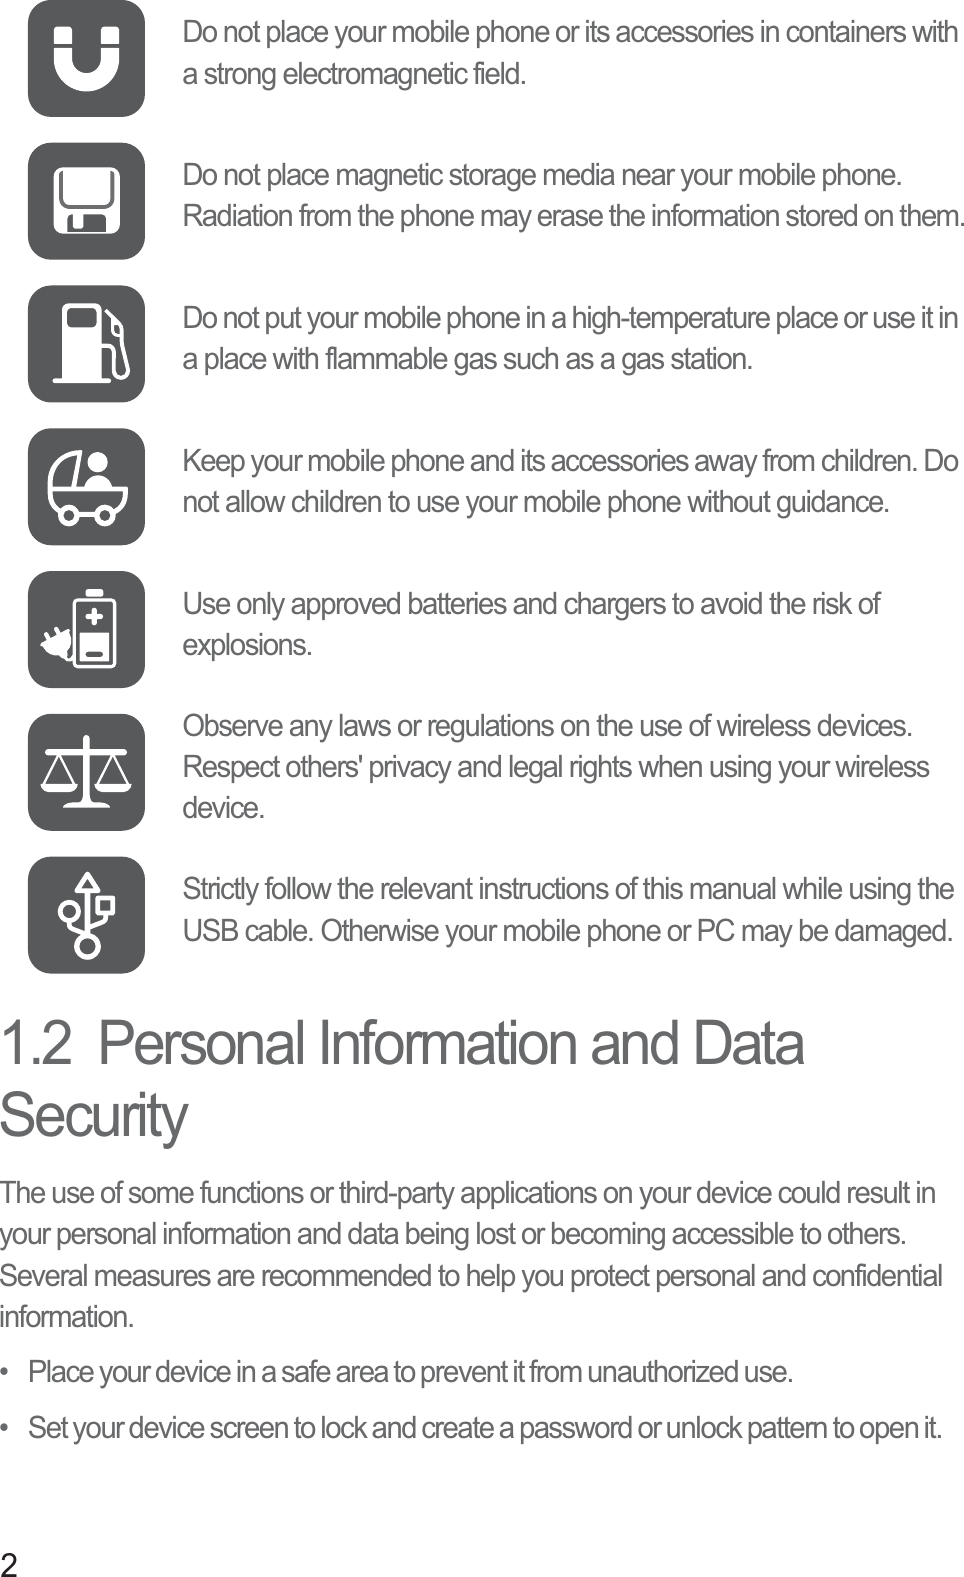 21.2  Personal Information and Data SecurityThe use of some functions or third-party applications on your device could result in your personal information and data being lost or becoming accessible to others. Several measures are recommended to help you protect personal and confidential information.•   Place your device in a safe area to prevent it from unauthorized use.•   Set your device screen to lock and create a password or unlock pattern to open it.Do not place your mobile phone or its accessories in containers with a strong electromagnetic field.Do not place magnetic storage media near your mobile phone. Radiation from the phone may erase the information stored on them.Do not put your mobile phone in a high-temperature place or use it in a place with flammable gas such as a gas station.Keep your mobile phone and its accessories away from children. Do not allow children to use your mobile phone without guidance.Use only approved batteries and chargers to avoid the risk of explosions.Observe any laws or regulations on the use of wireless devices. Respect others&apos; privacy and legal rights when using your wireless device.Strictly follow the relevant instructions of this manual while using the USB cable. Otherwise your mobile phone or PC may be damaged.